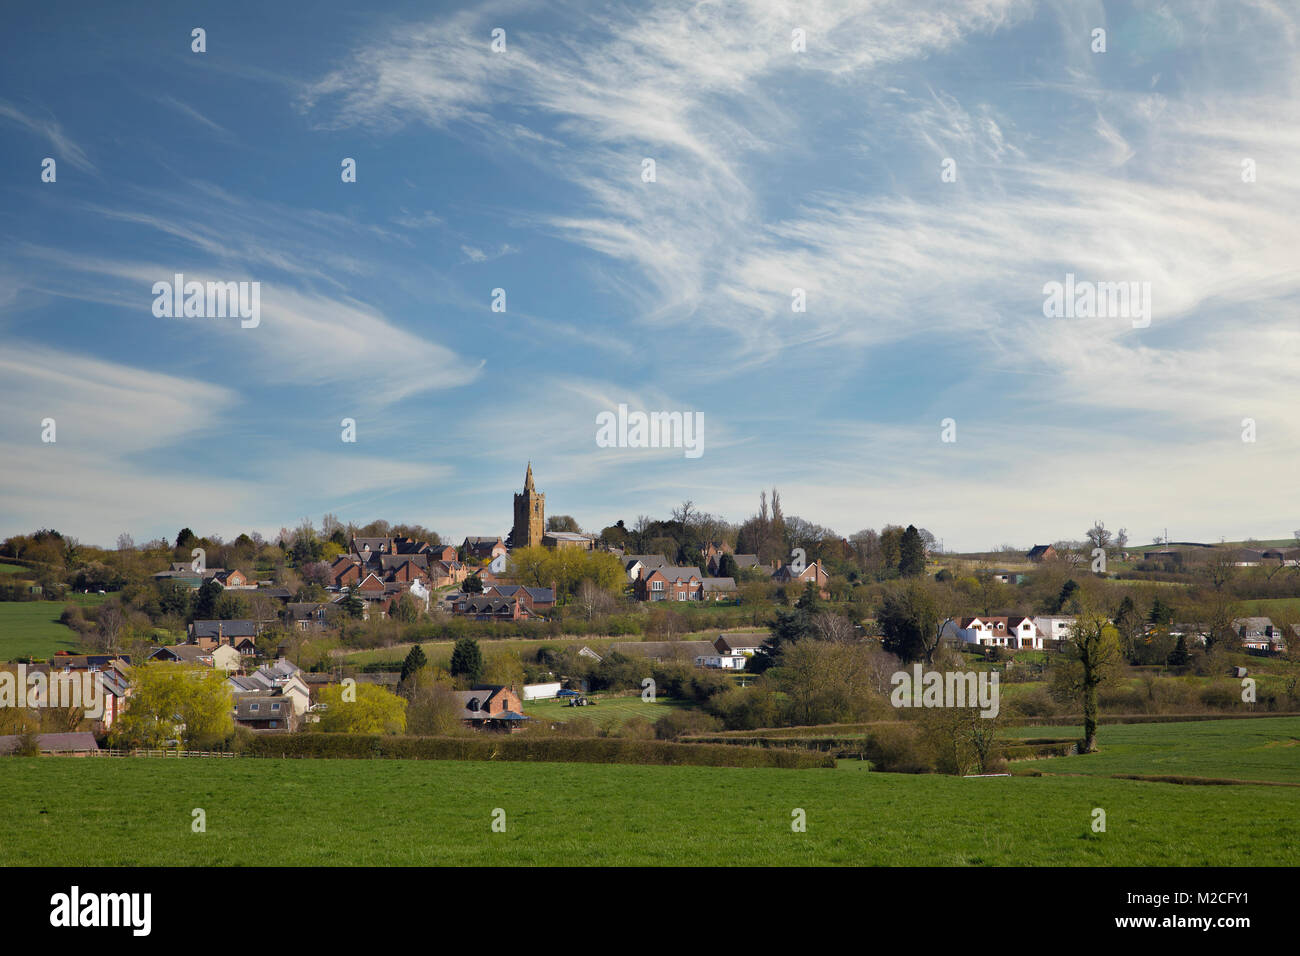 An image of the Village of South Croxton Leicestershire on a beautiful spring day, England, UK Stock Photo